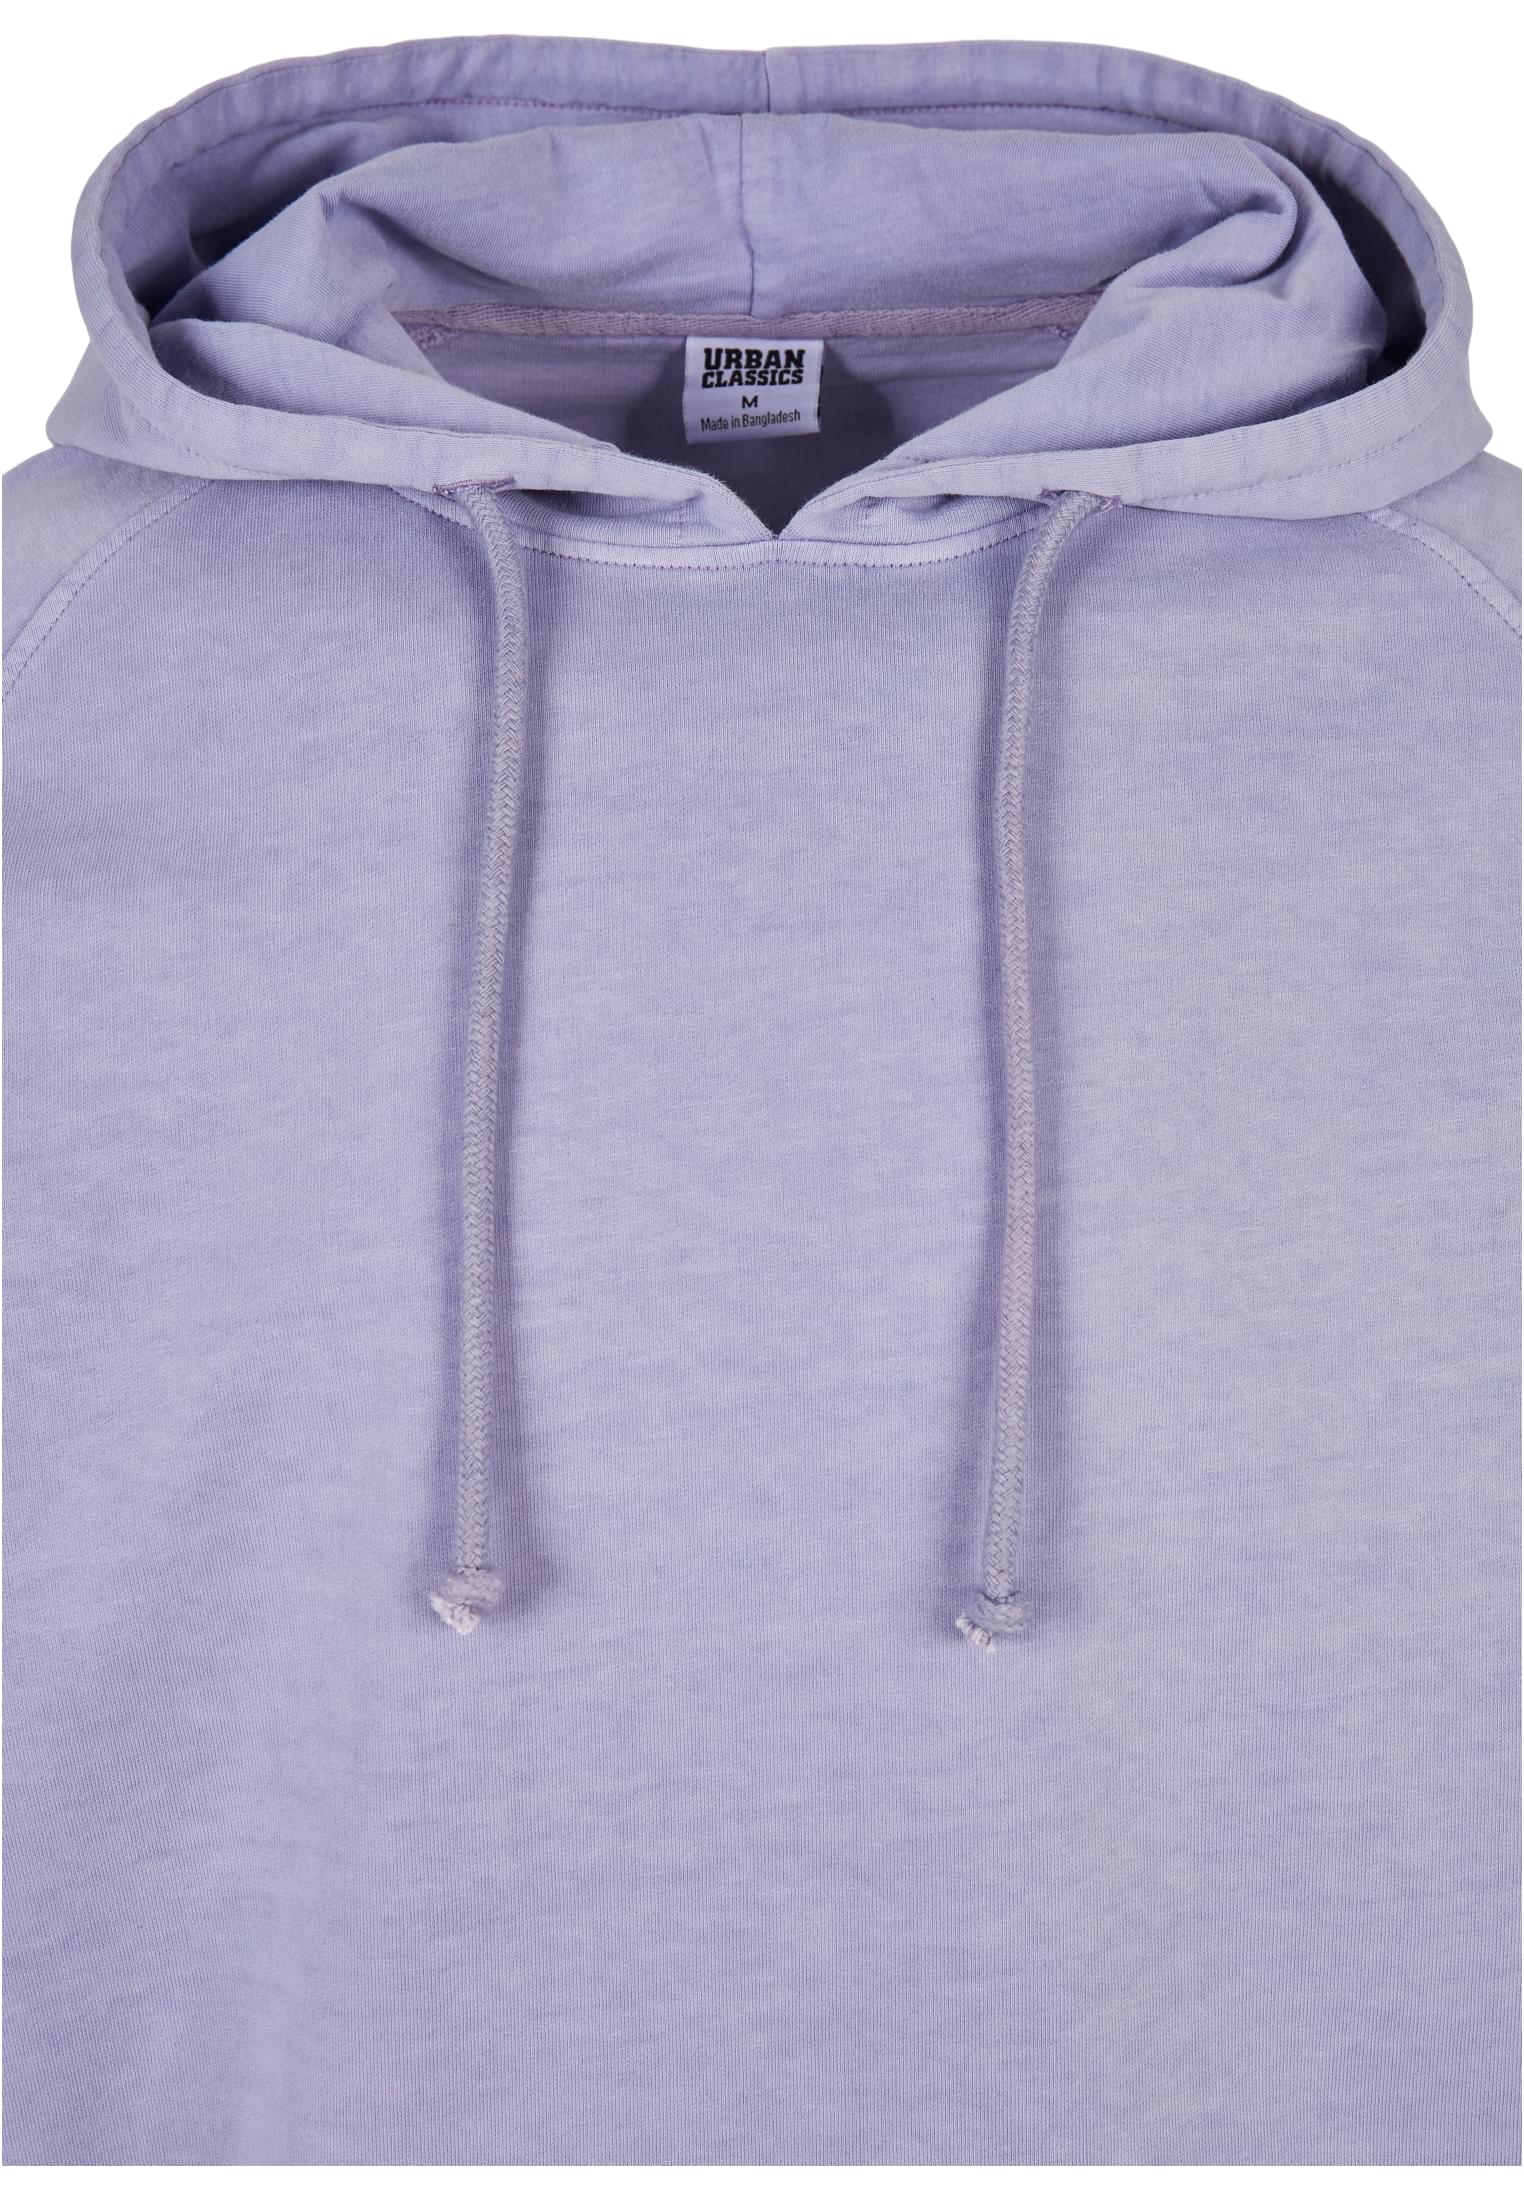 Hoodies Overdyed Hoody in Farbe lavender